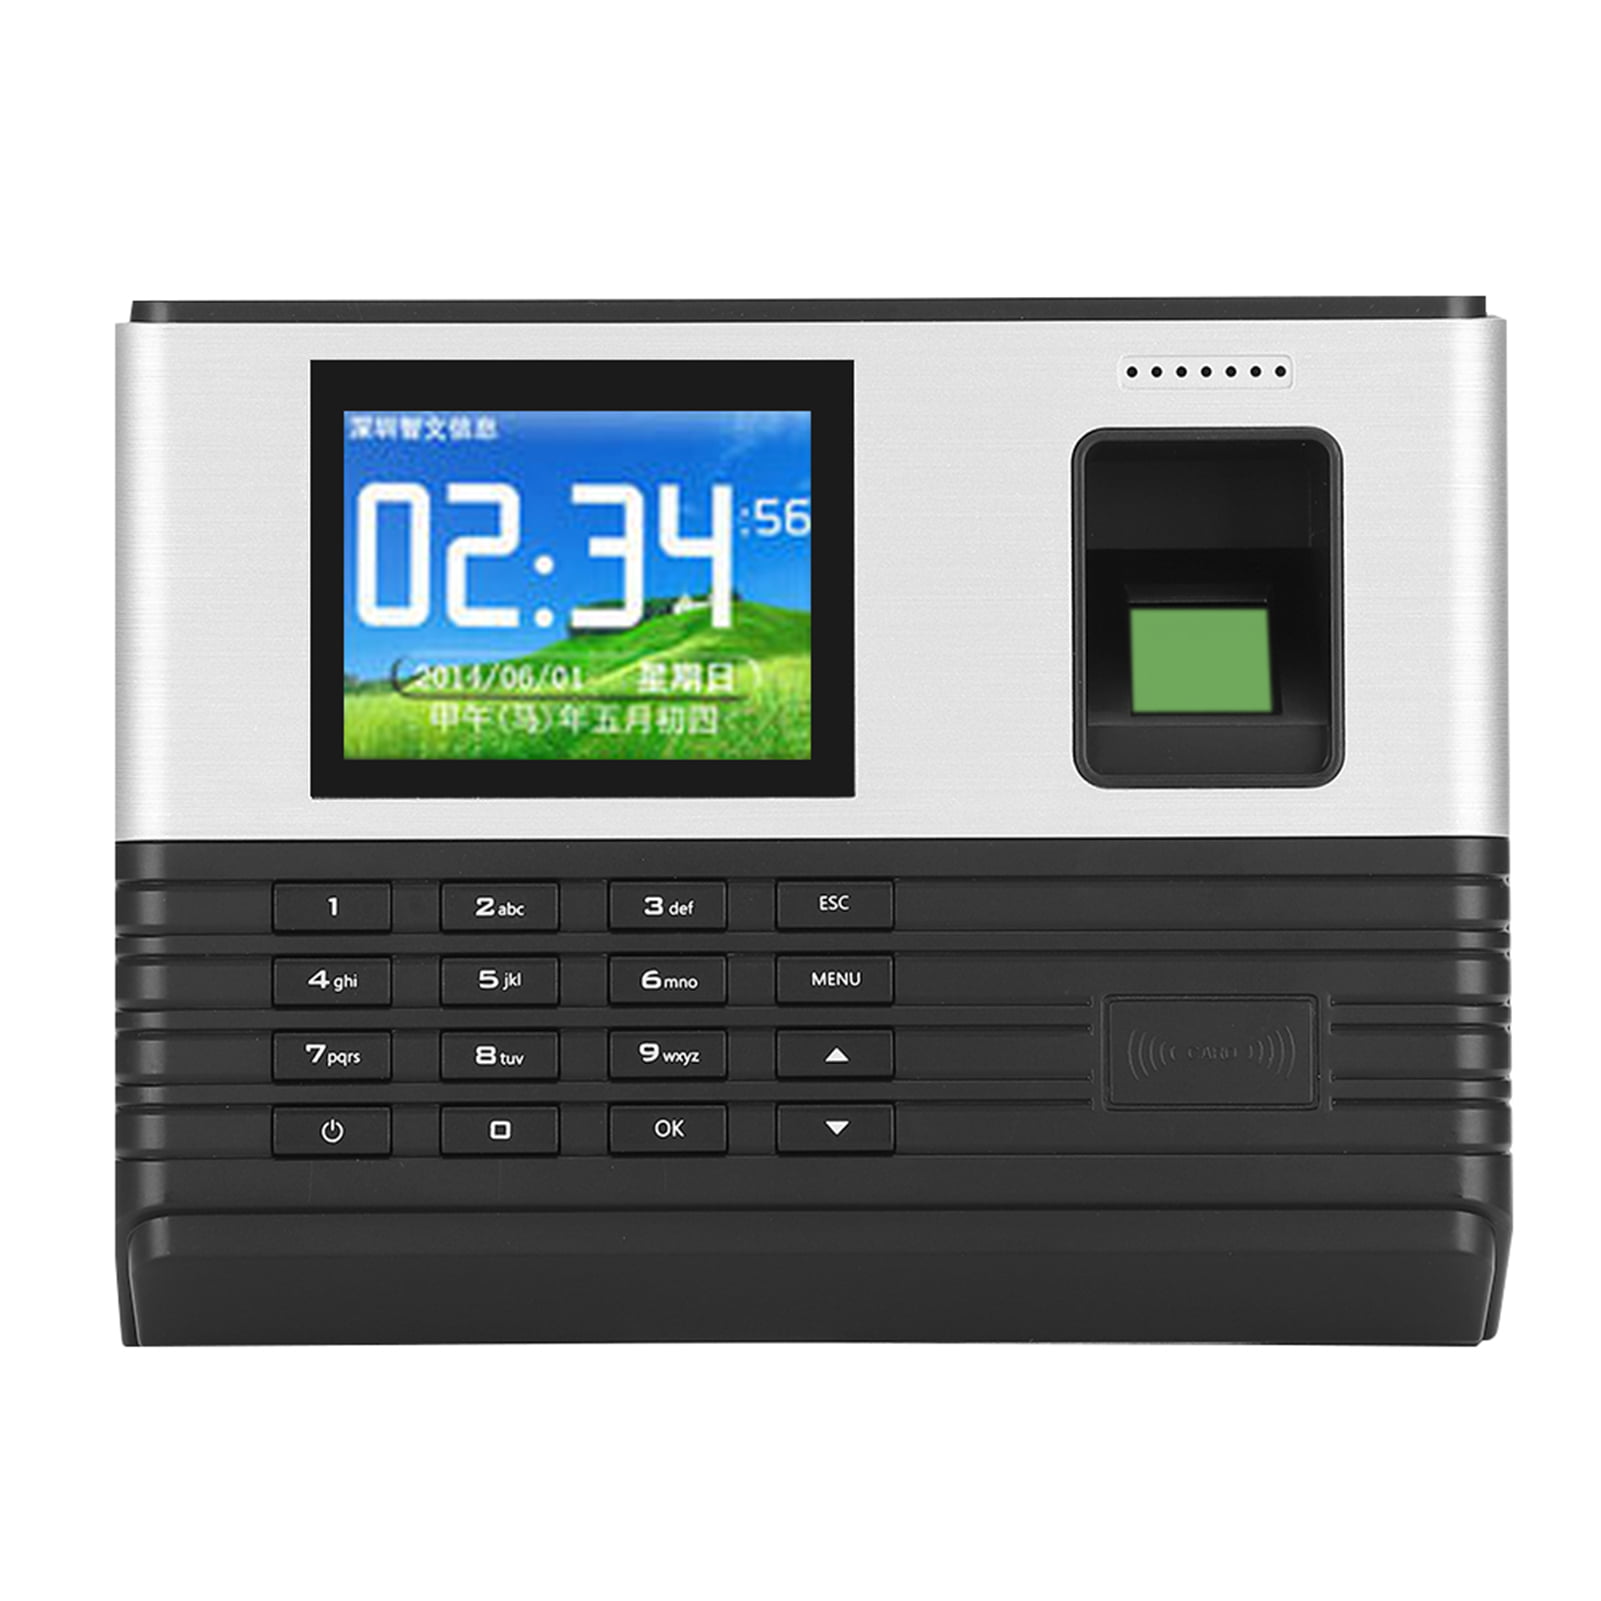 Details about   2Biometric Fingerprint Checking-in Attendance Machine Employee Time Clock TCP/IP 